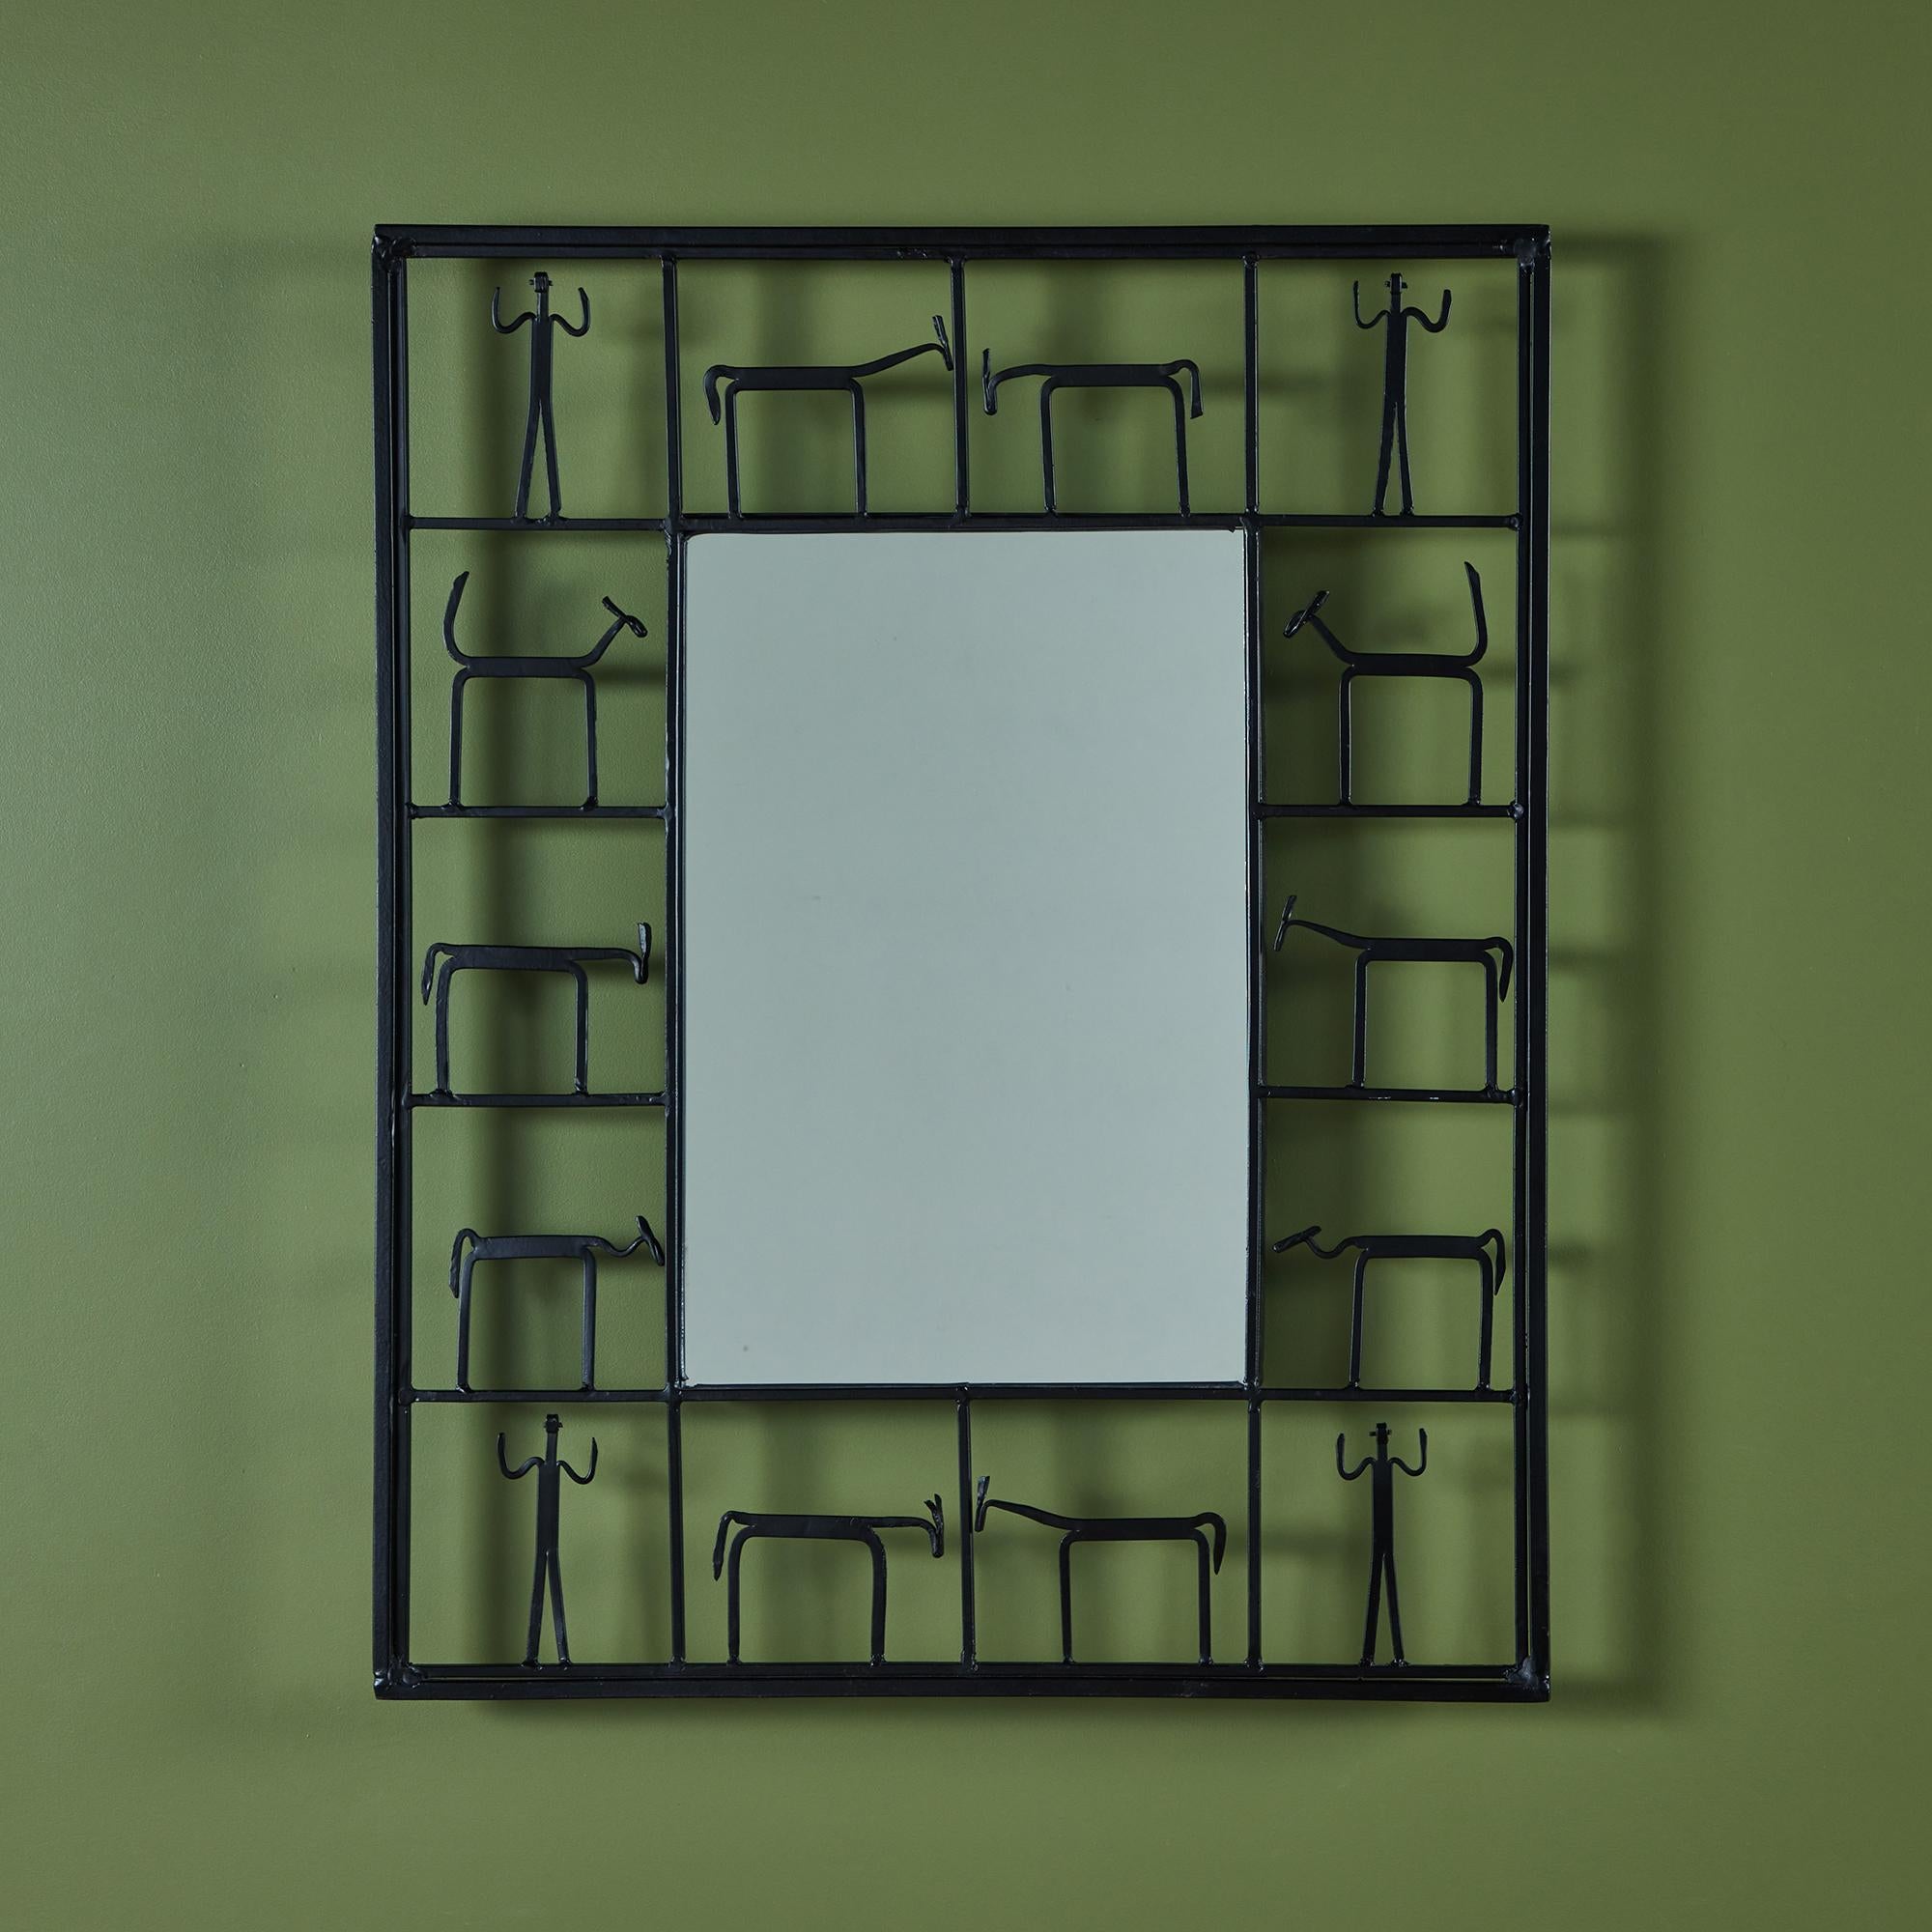 Modernist wall mirror in the style of Frederick Weinberg. The rectangular mirror features a black iron frame depicting animals and figures.

Dimensions
24.25